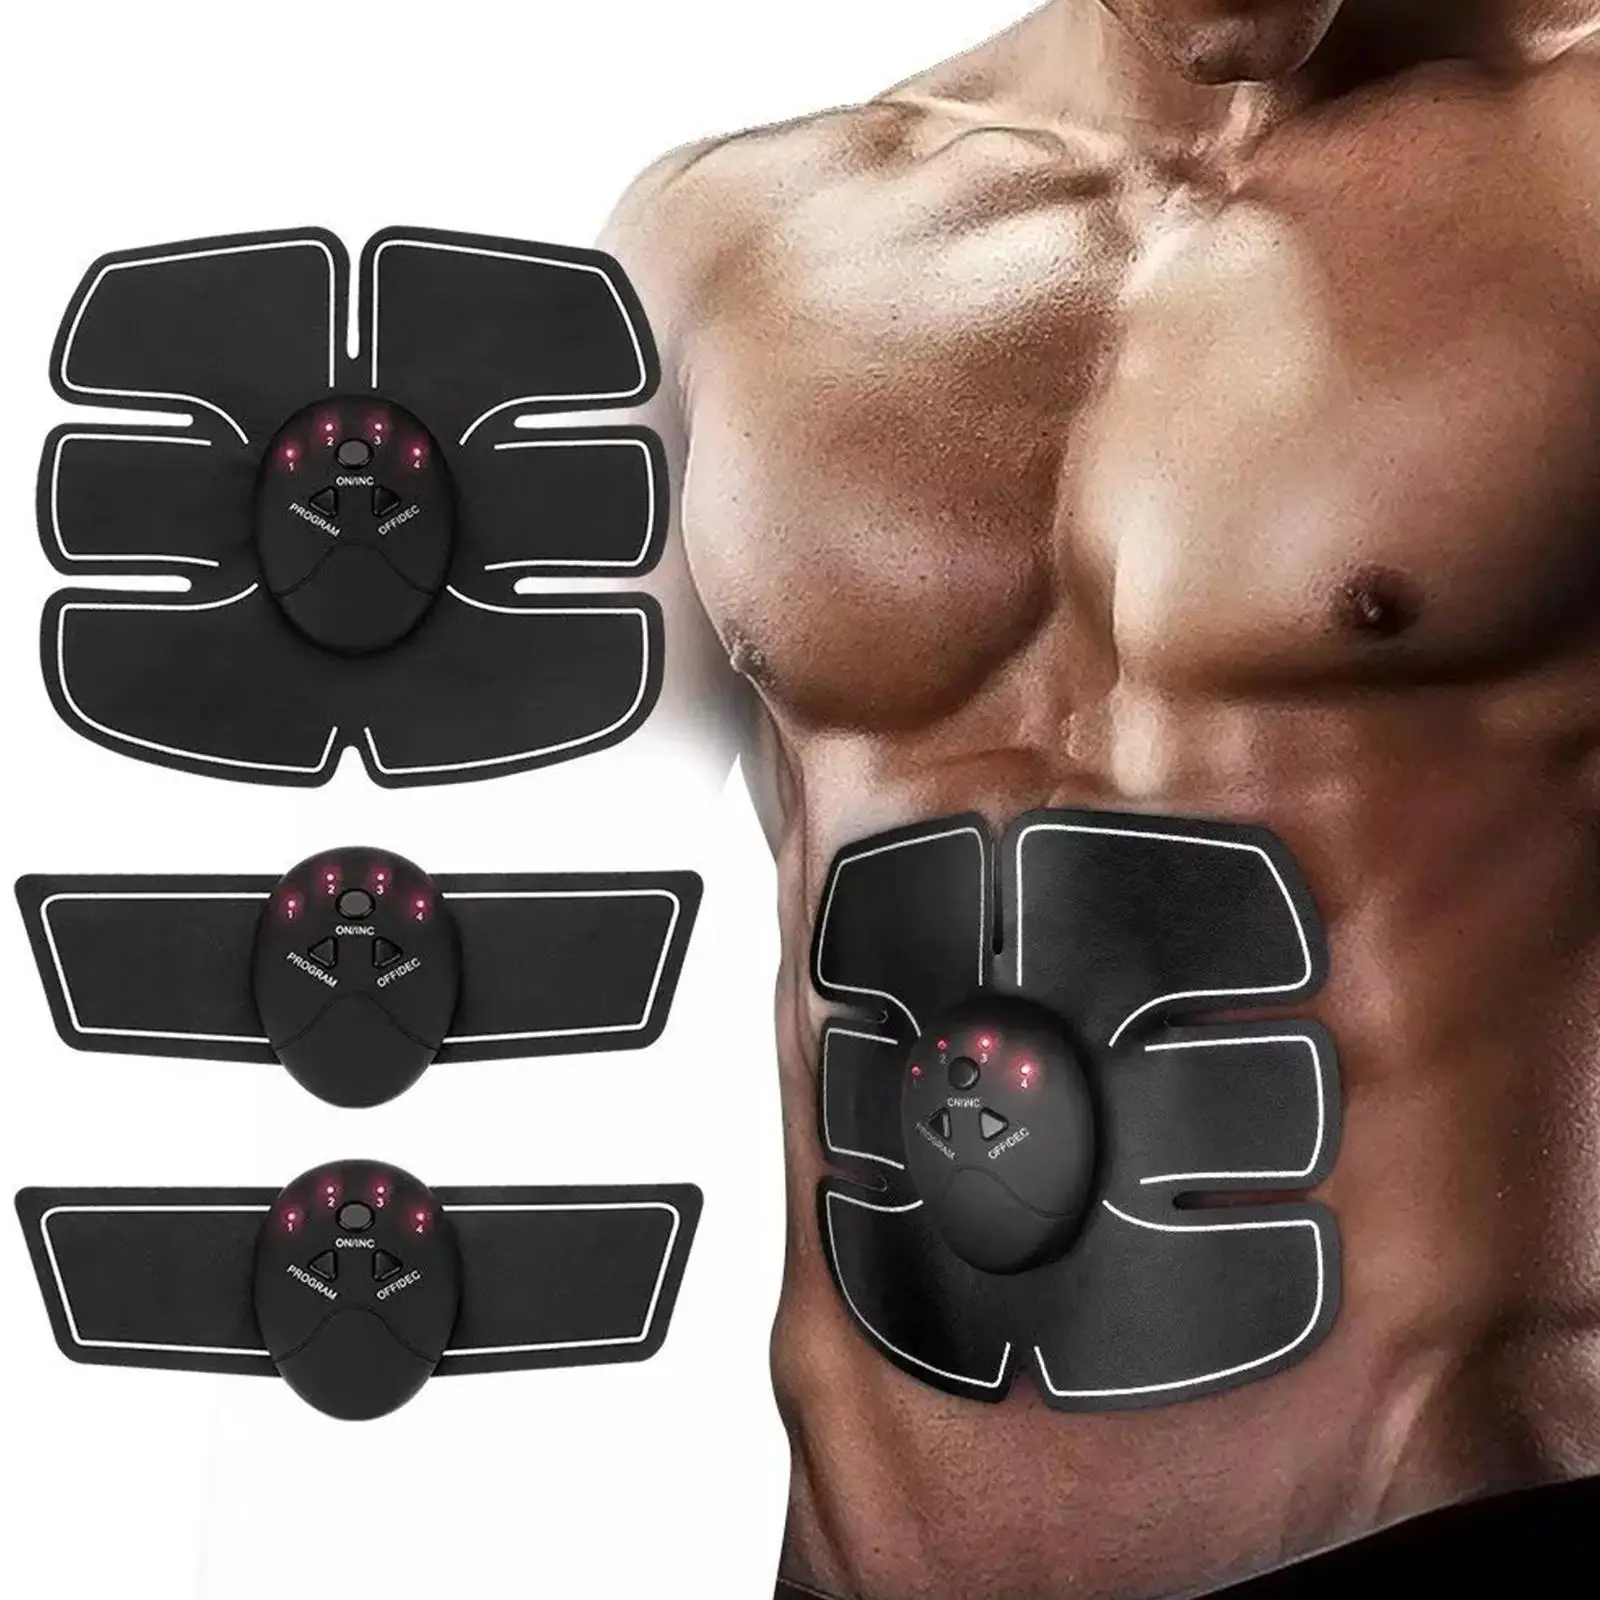 

Wireless EMS Muscle Stimulator Toner ABS Abdominal Hip Trainer Weight Loss Fitness Shaping Electric Body Slimming Massager